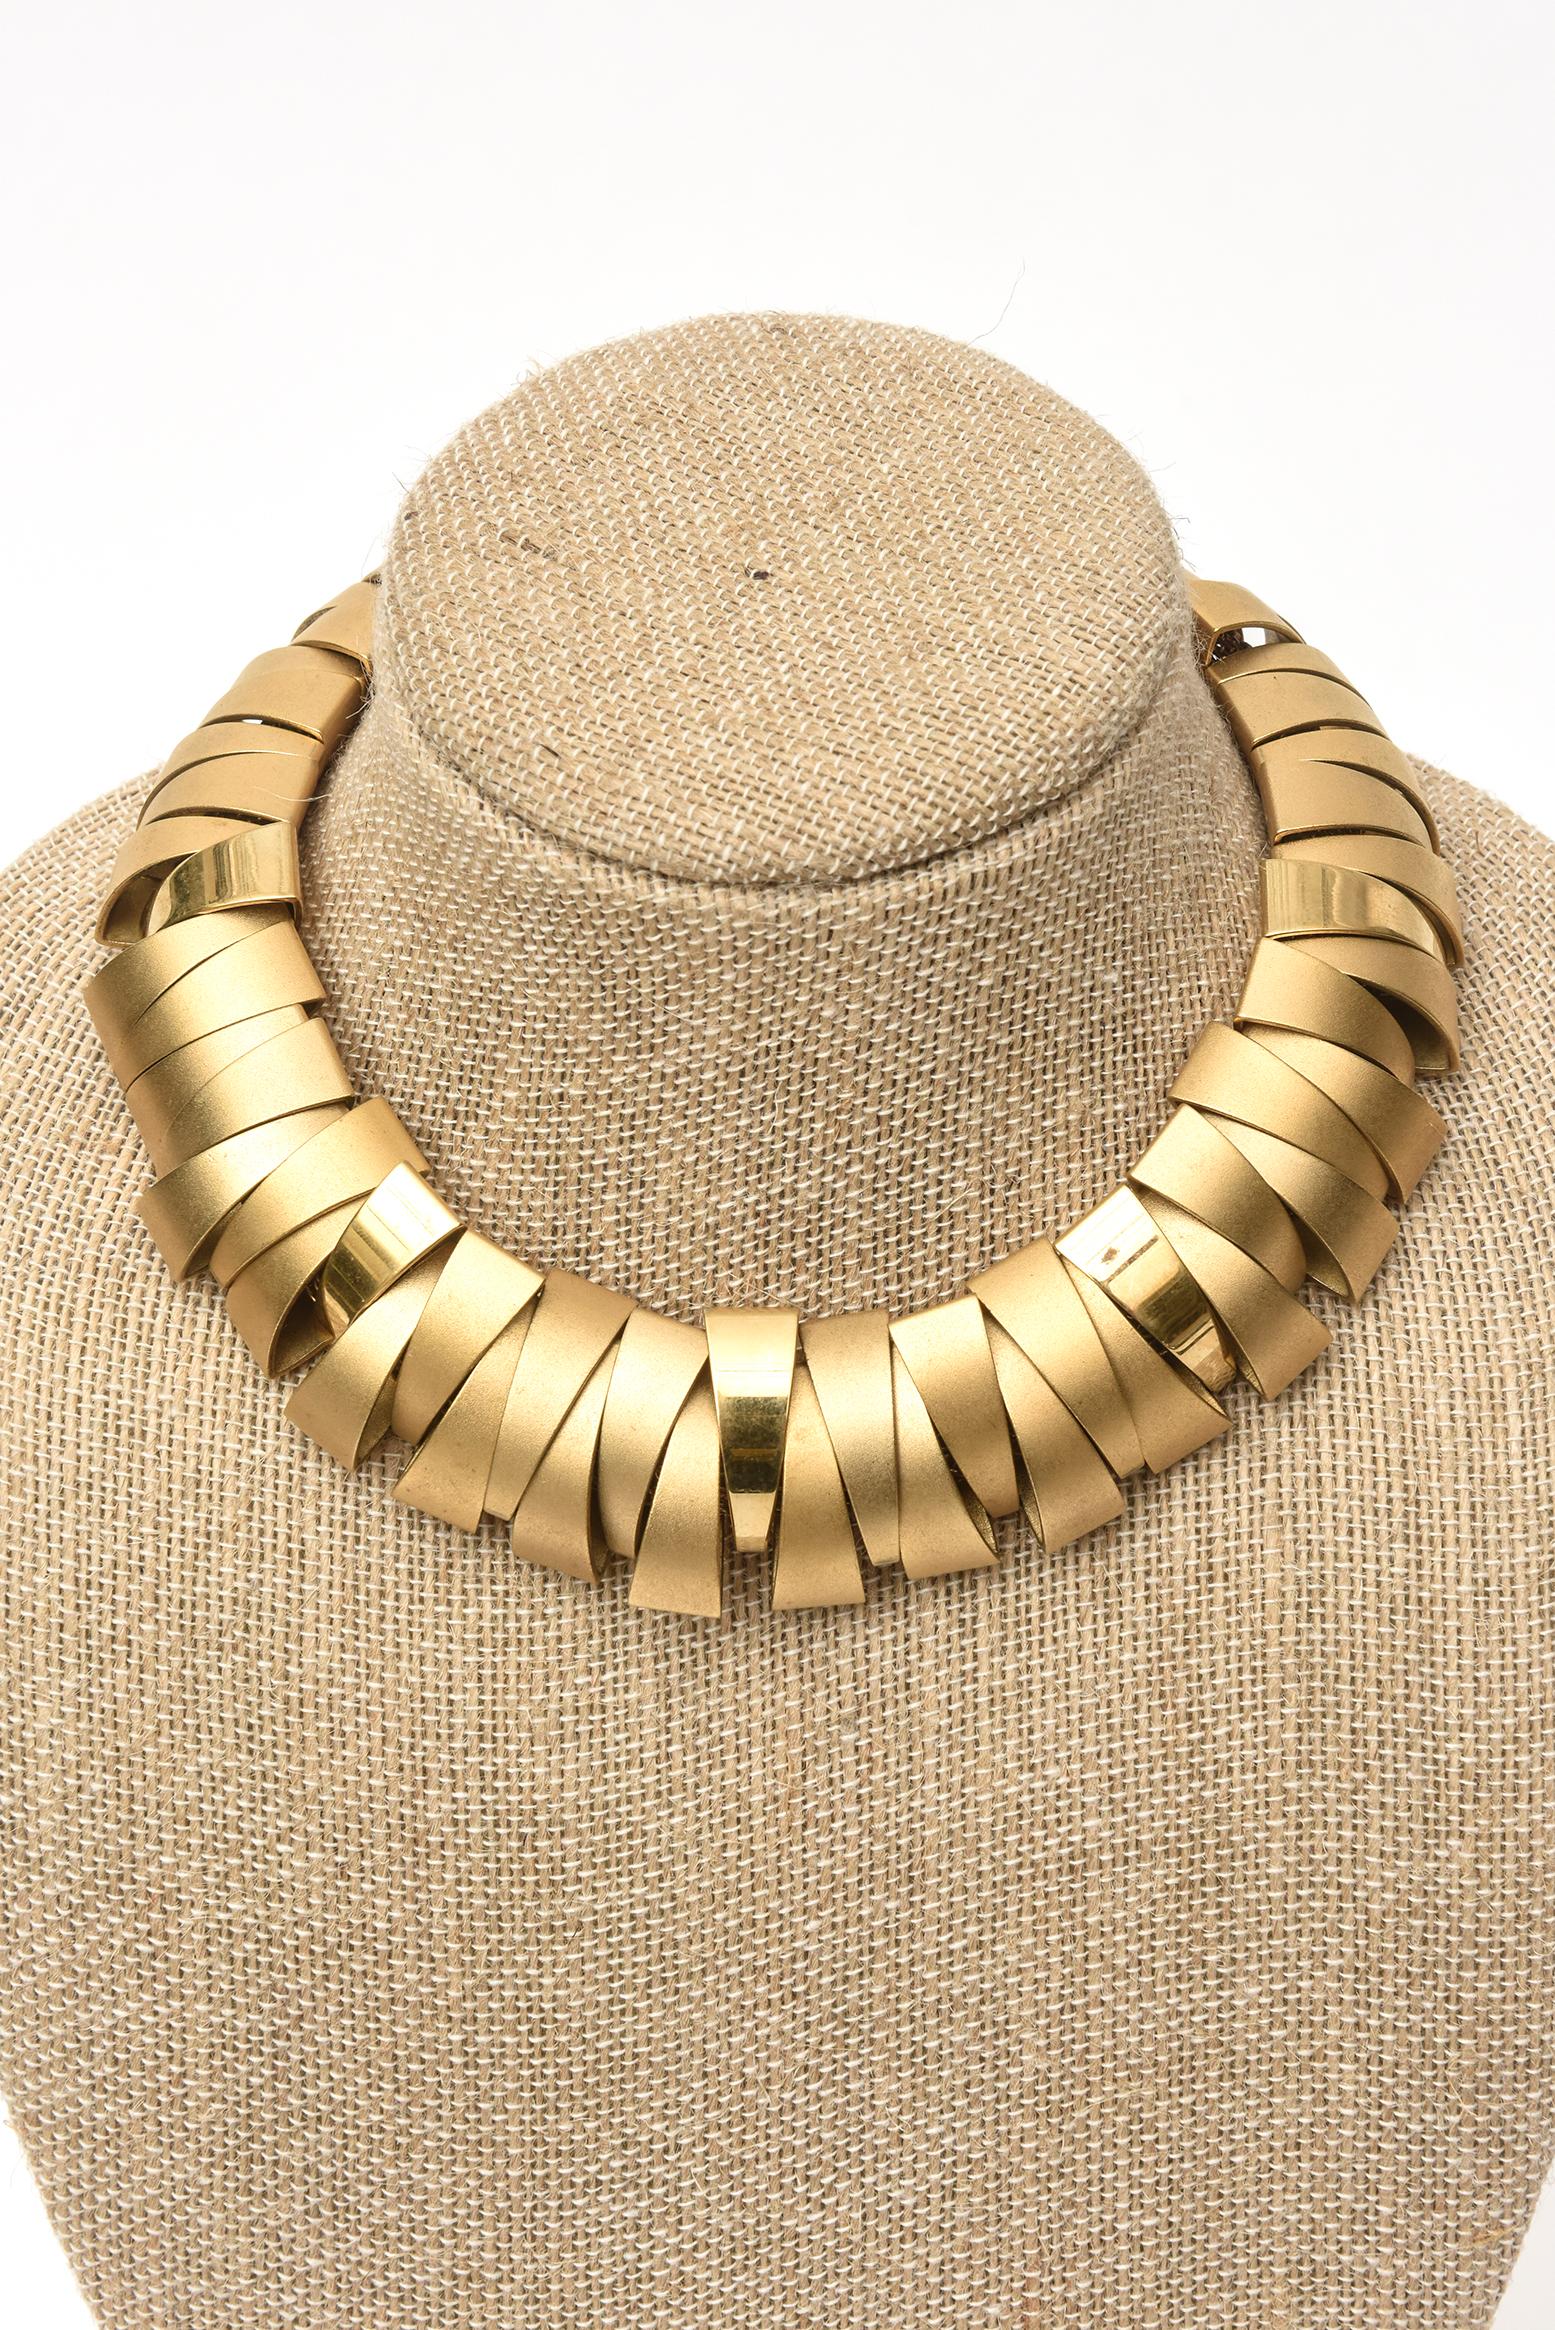  Sculptural Gold Plated Collar Necklace 4